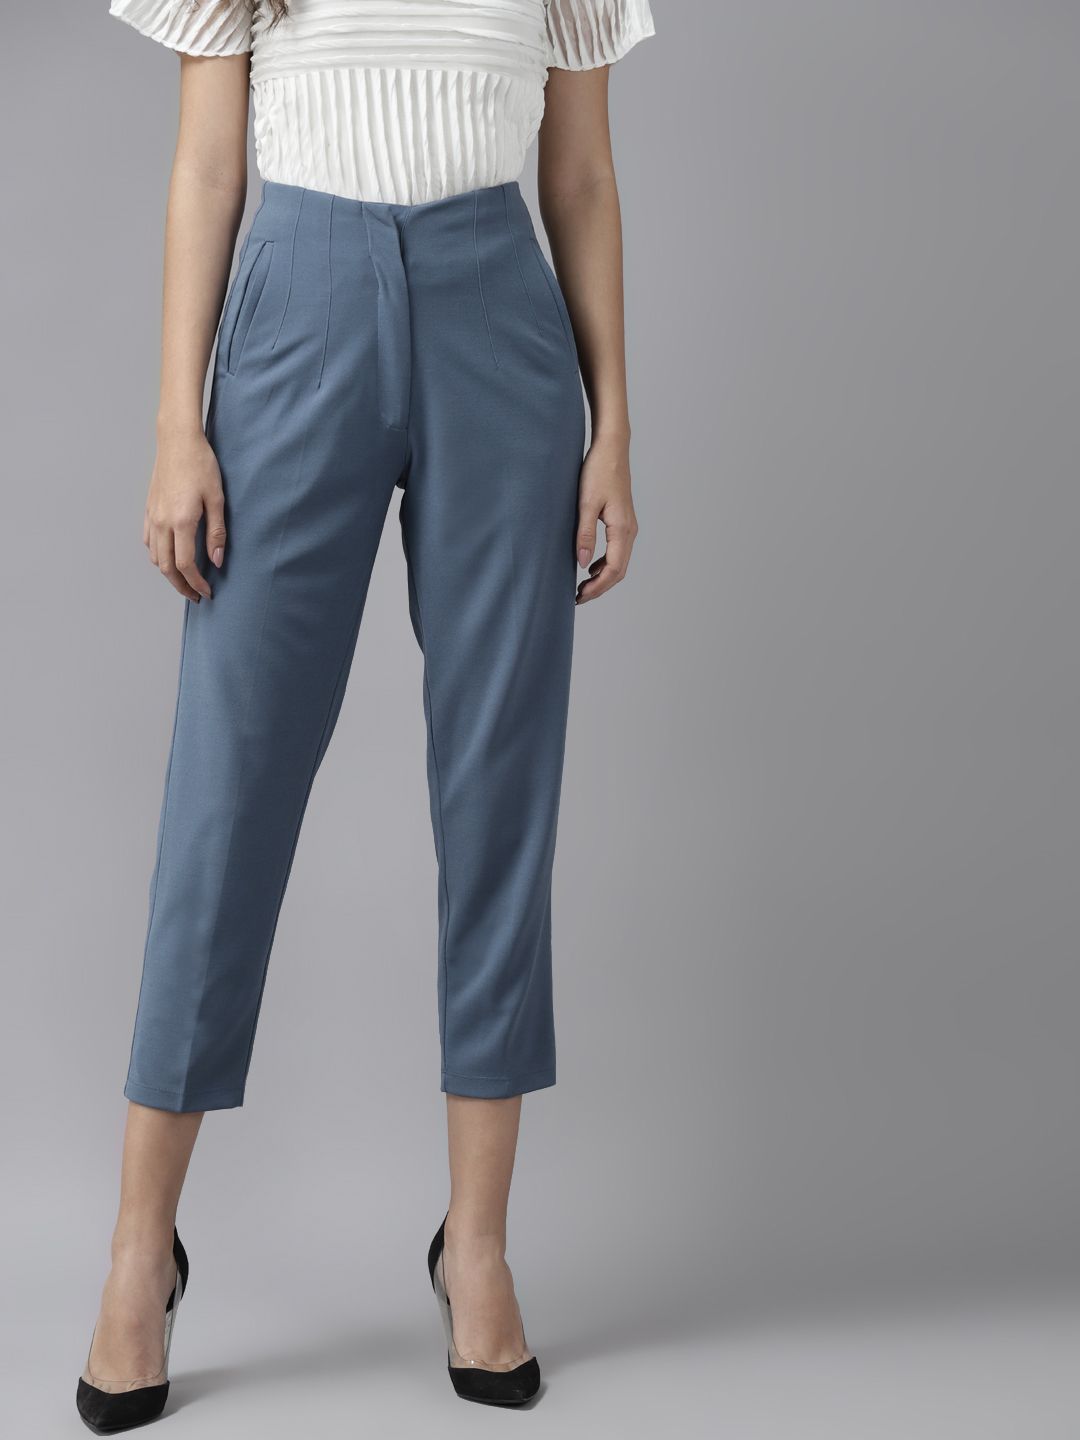 KASSUALLY Women Blue Solid Peg Trousers Price in India